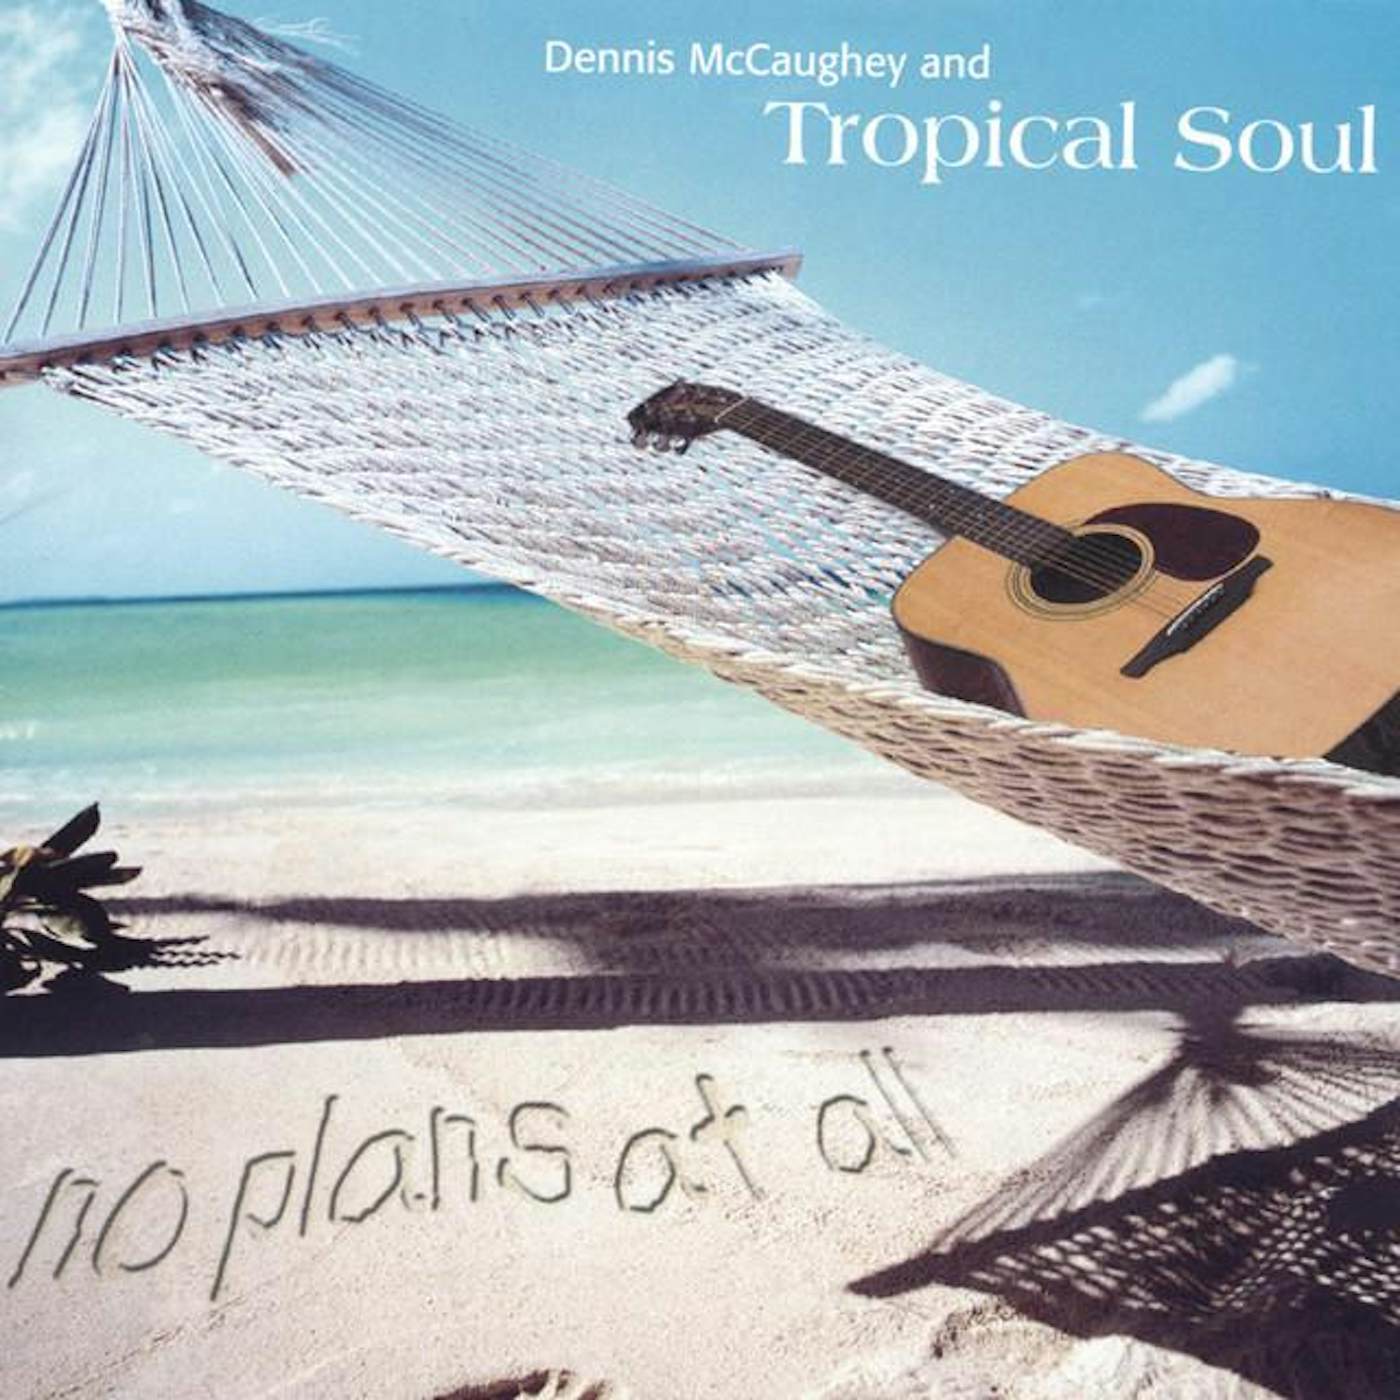 Dennis McCaughey and Tropical Soul